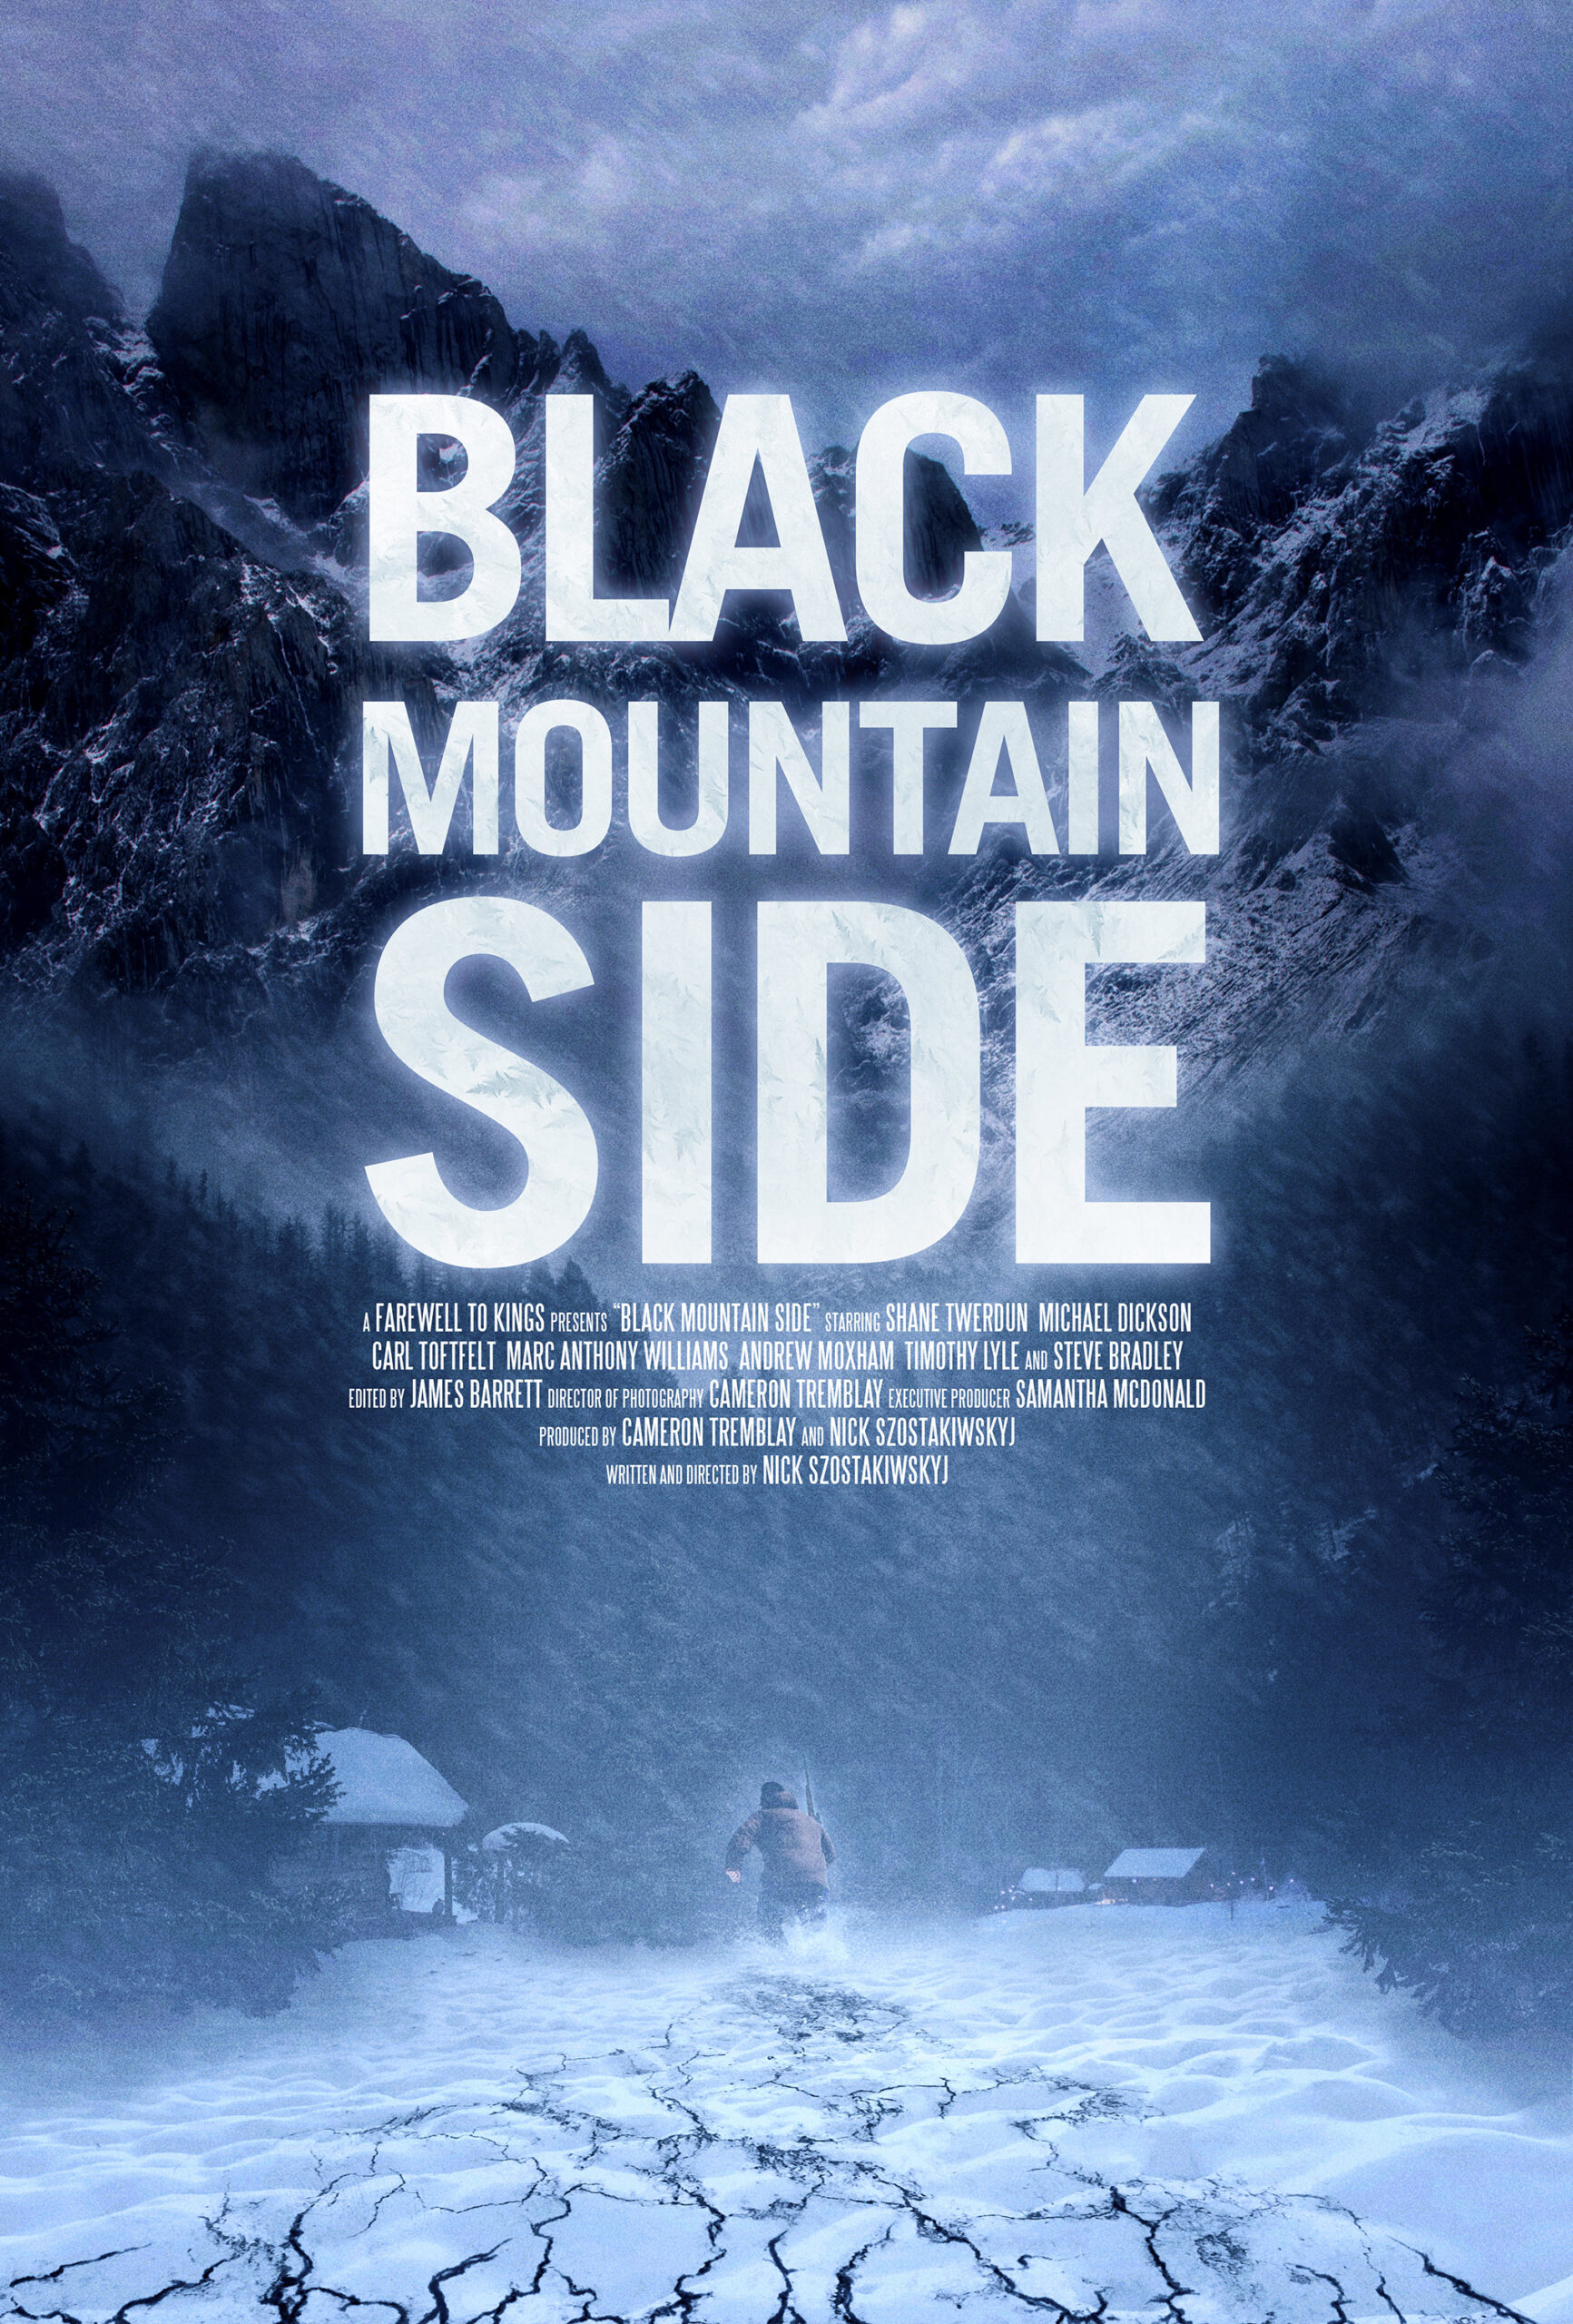 There Is Something Under The Ice – Black Mountain Side (2014)